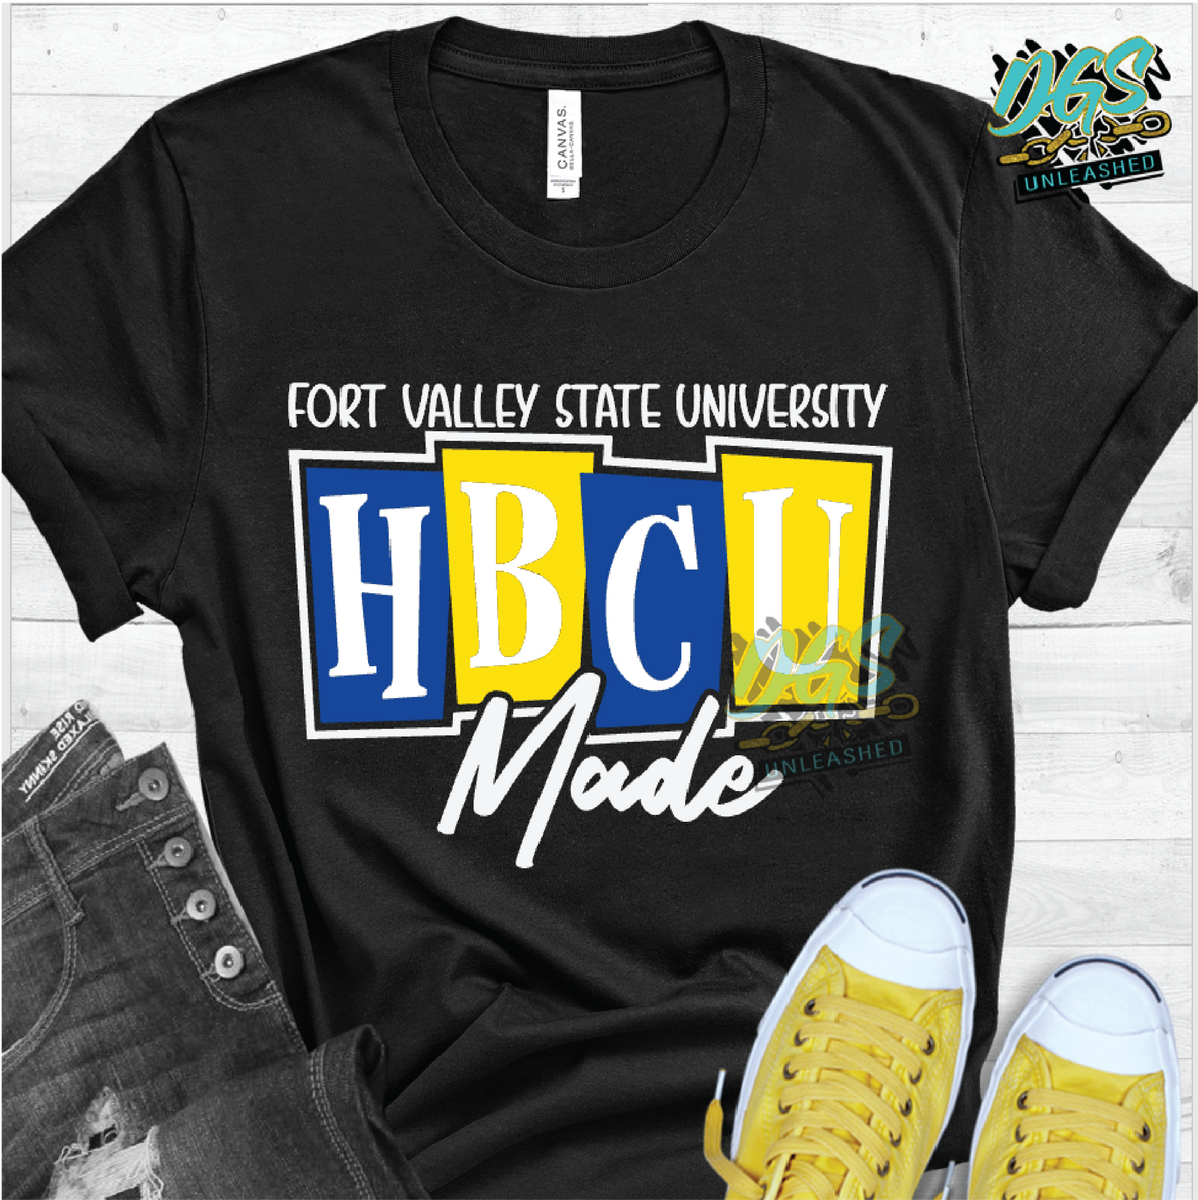 HBCU Made SVG, DXF, PNG, and EPS Cricut-Silhouette Instant Digital Dow ...